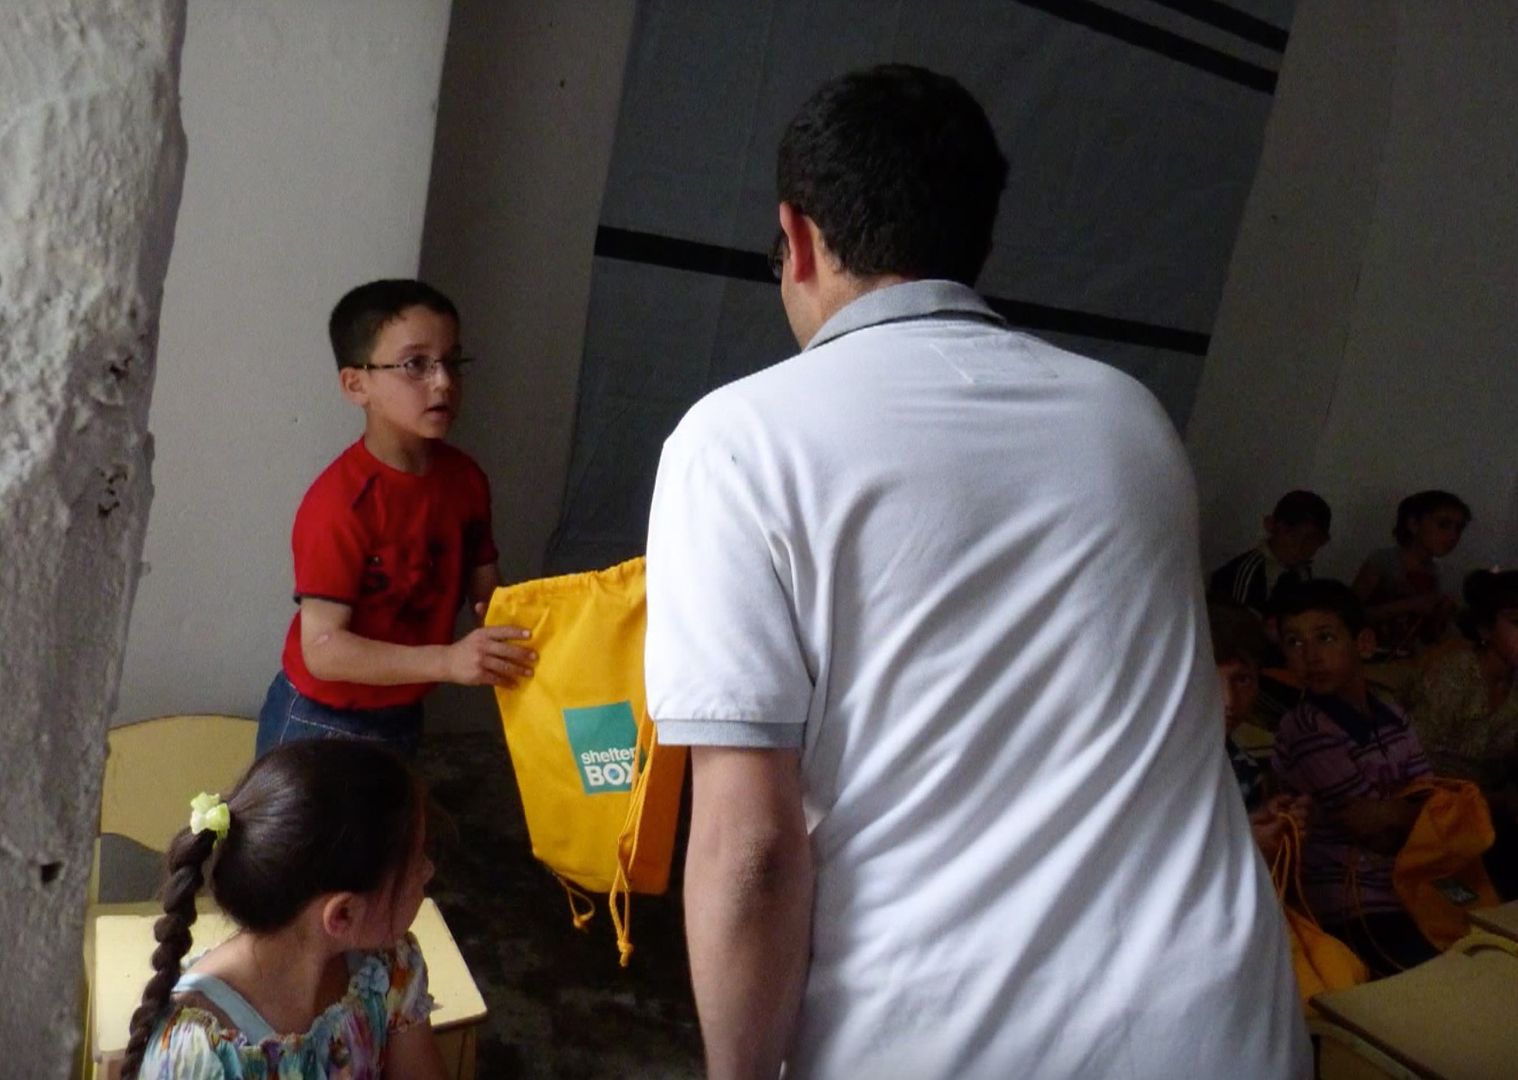 How to help in Syria: Shelterbox is supplying thousands of shelters for displaced families